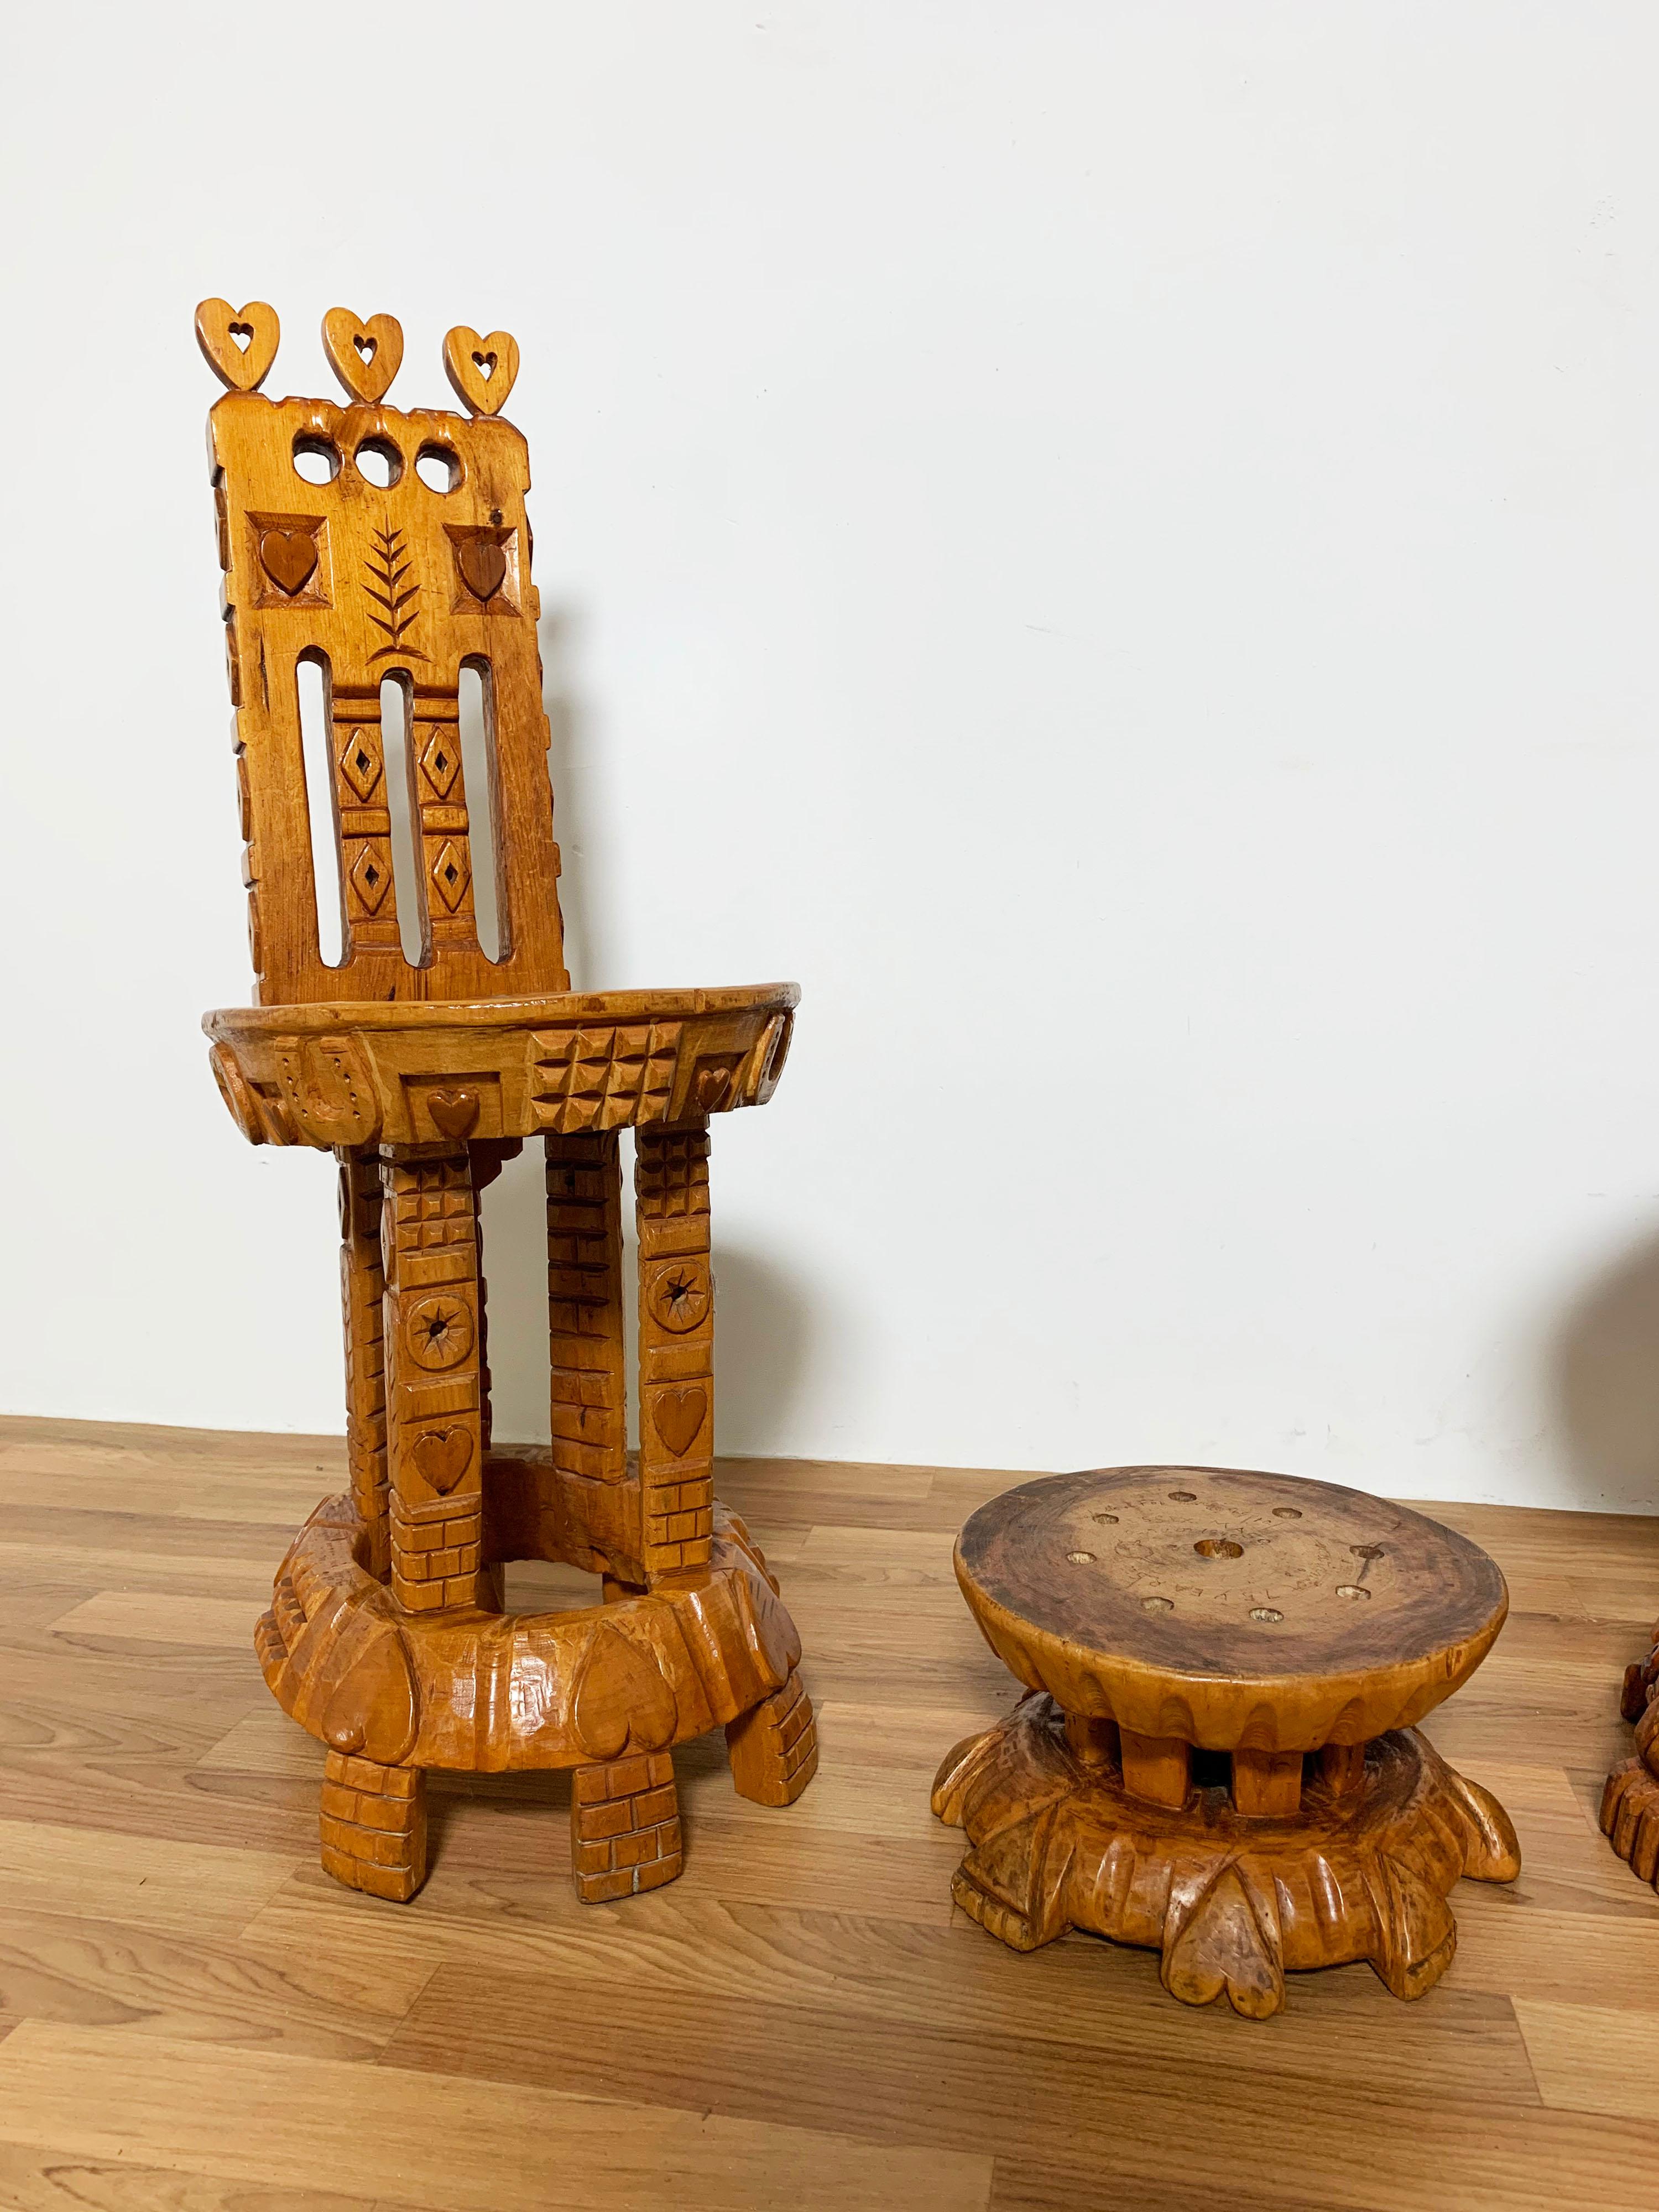 Pair of folk art hand carved chairs with footstool by Joseph Deveau (1901-1999), made by the artist for himself and his wife. 

Deveau crafted his furniture each evening over several decades during the mid 20th century, All of his pieces were